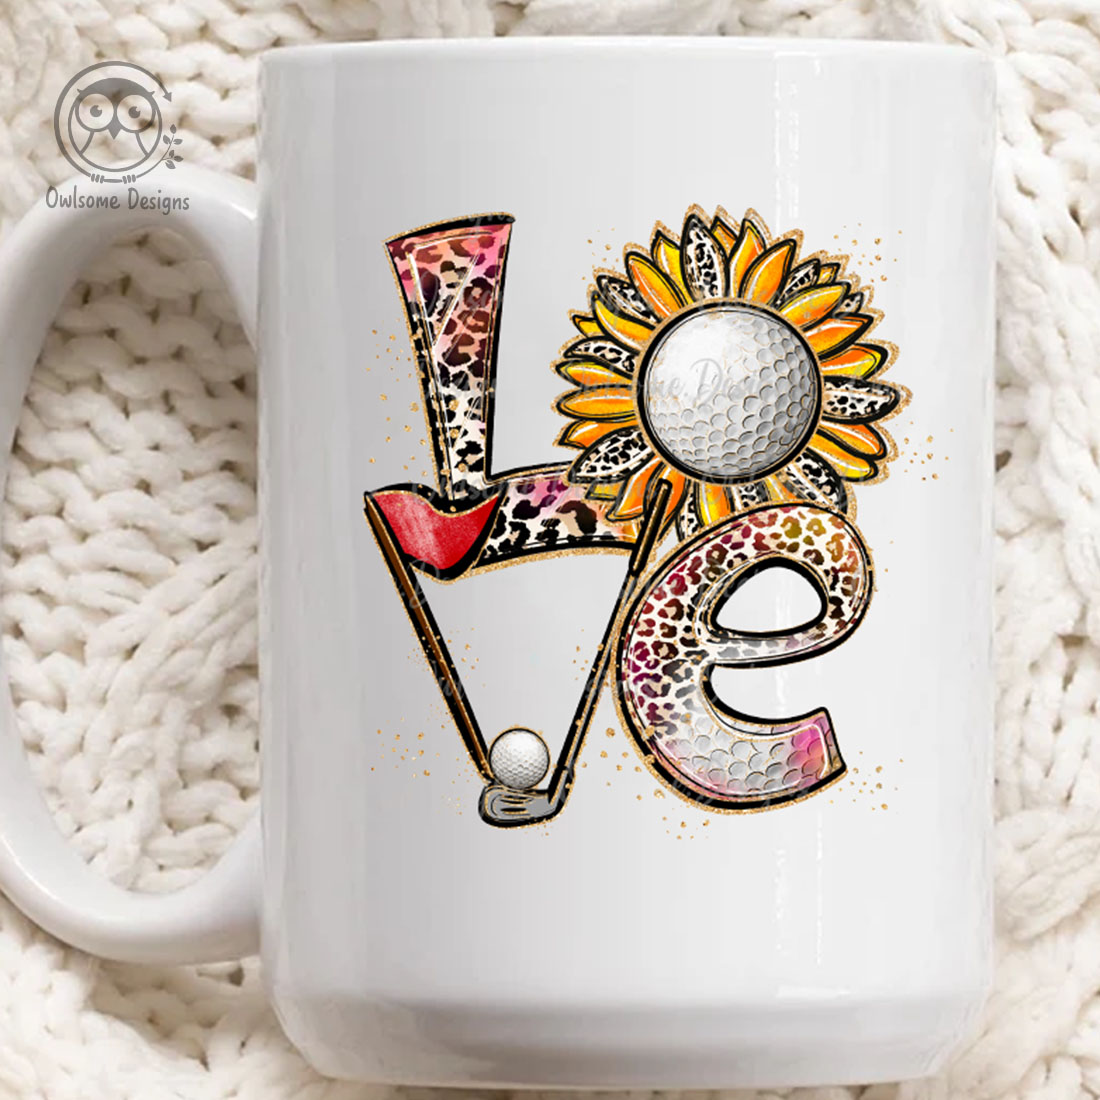 Image of a white cup with a unique inscription Love with golf elements.